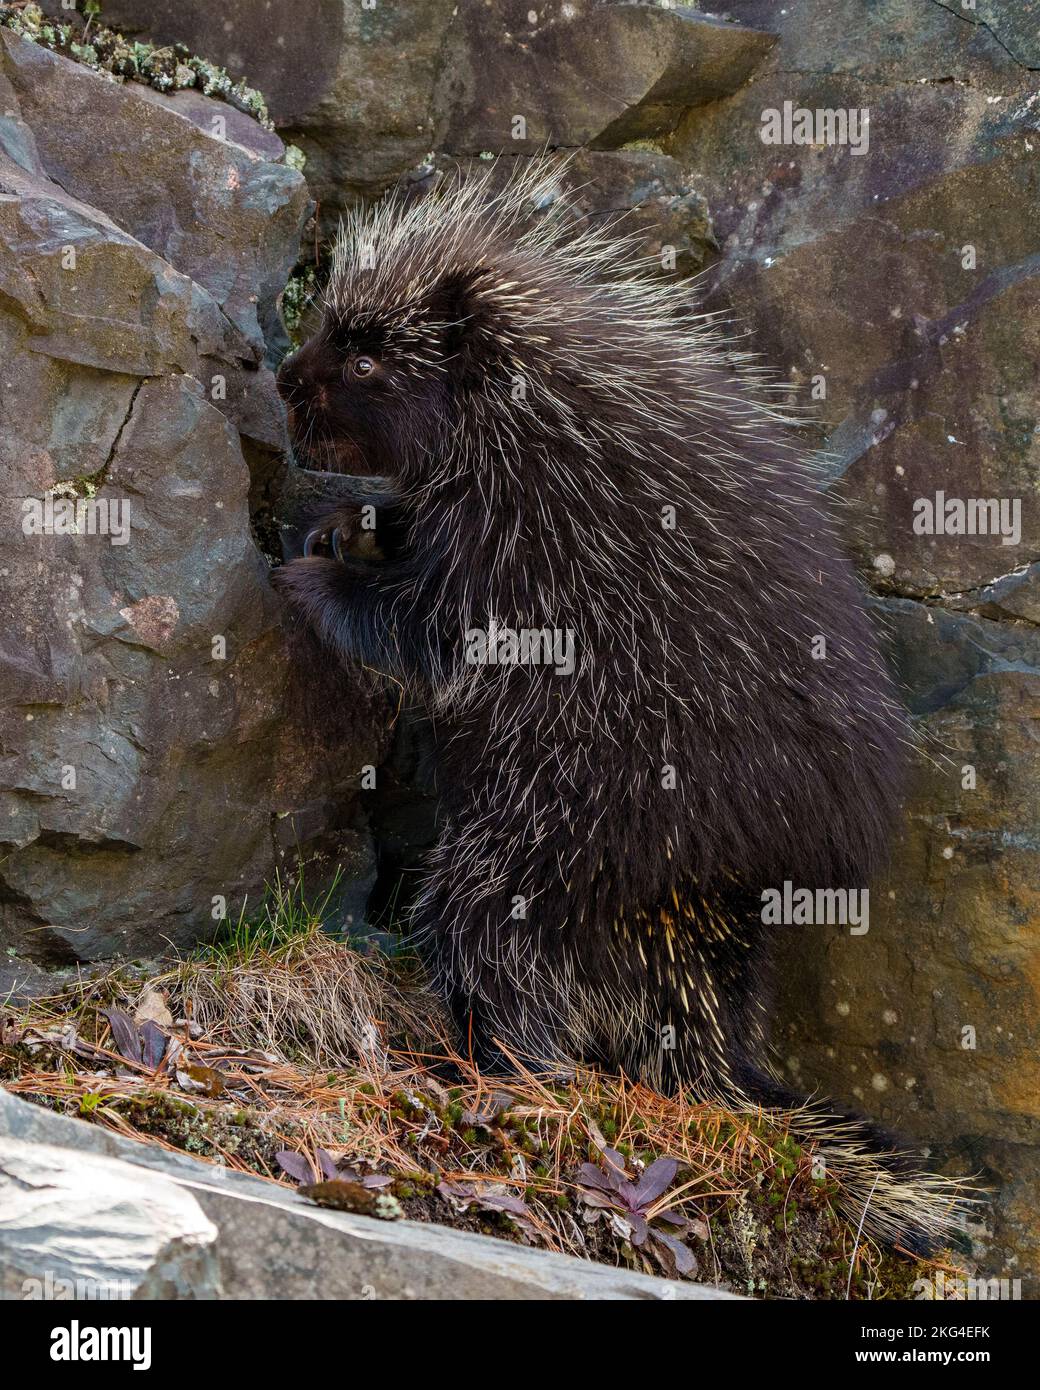 Porcupine standing by a big rock and moss in its environment surrounding and habitat displaying its sharp pointy spines and brown colour. Stock Photo